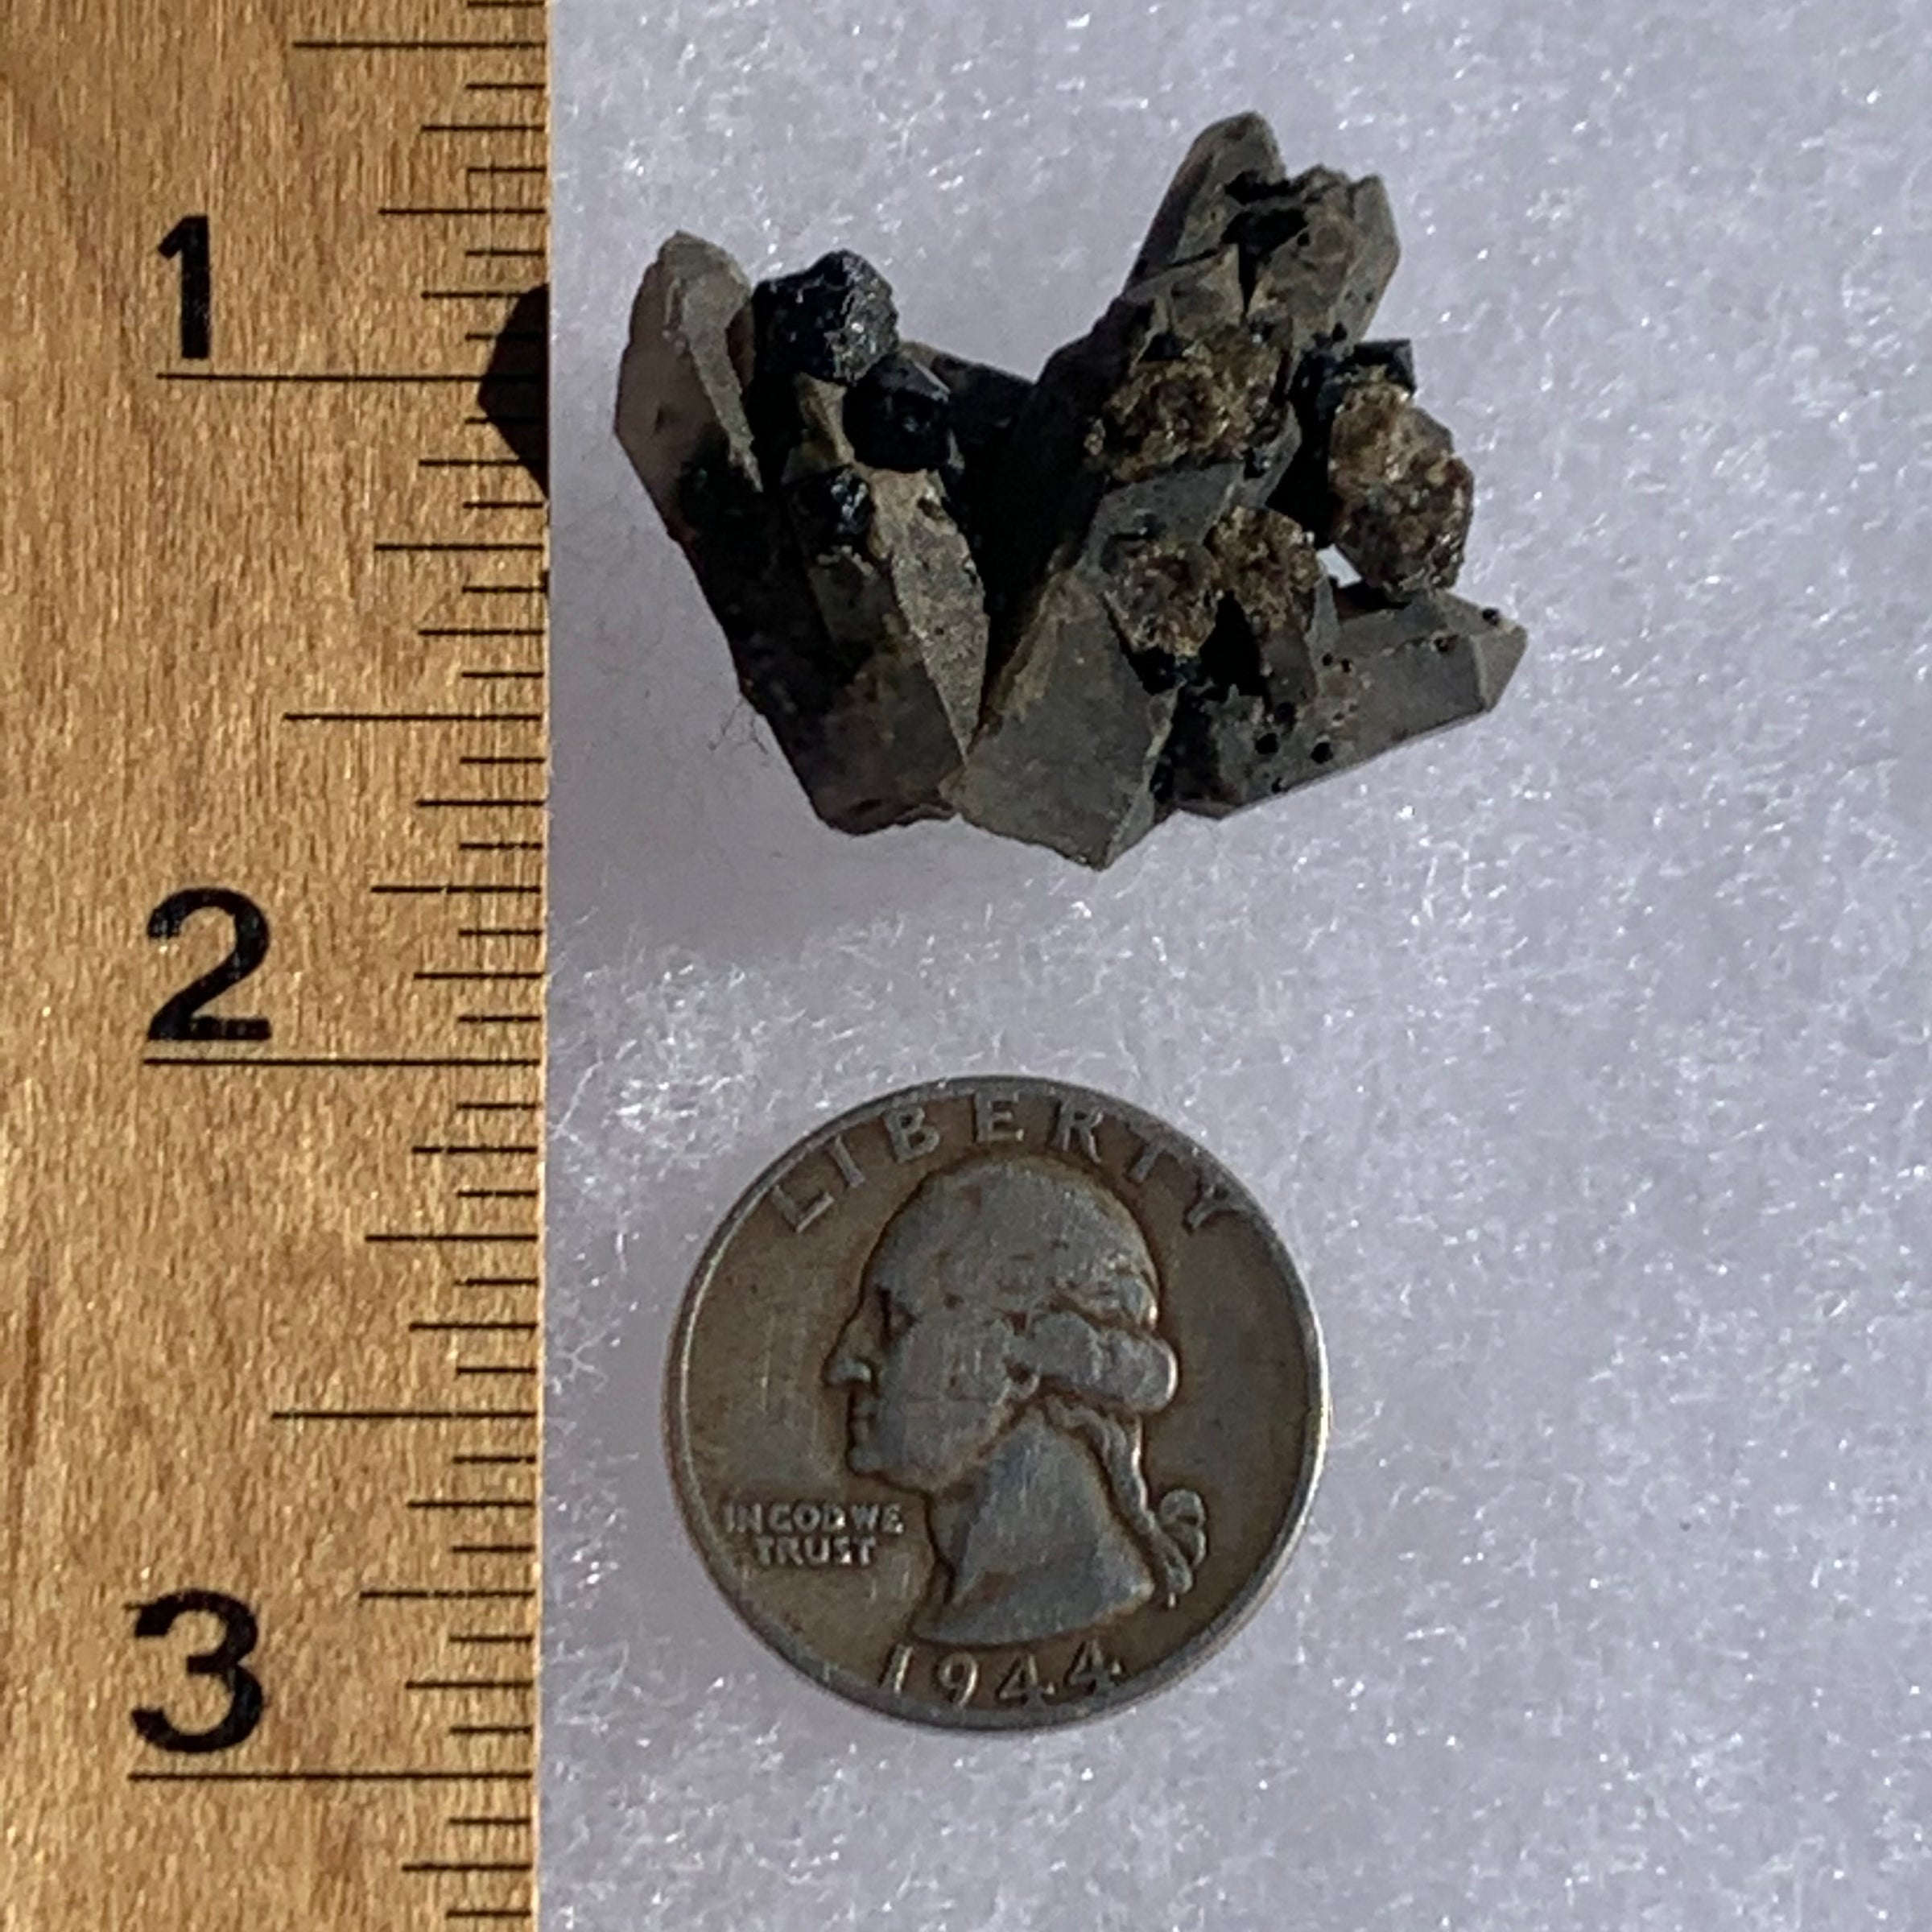 big and small brookite crystals on a smokey quartz point cluster next to a ruler and a quarter for scale